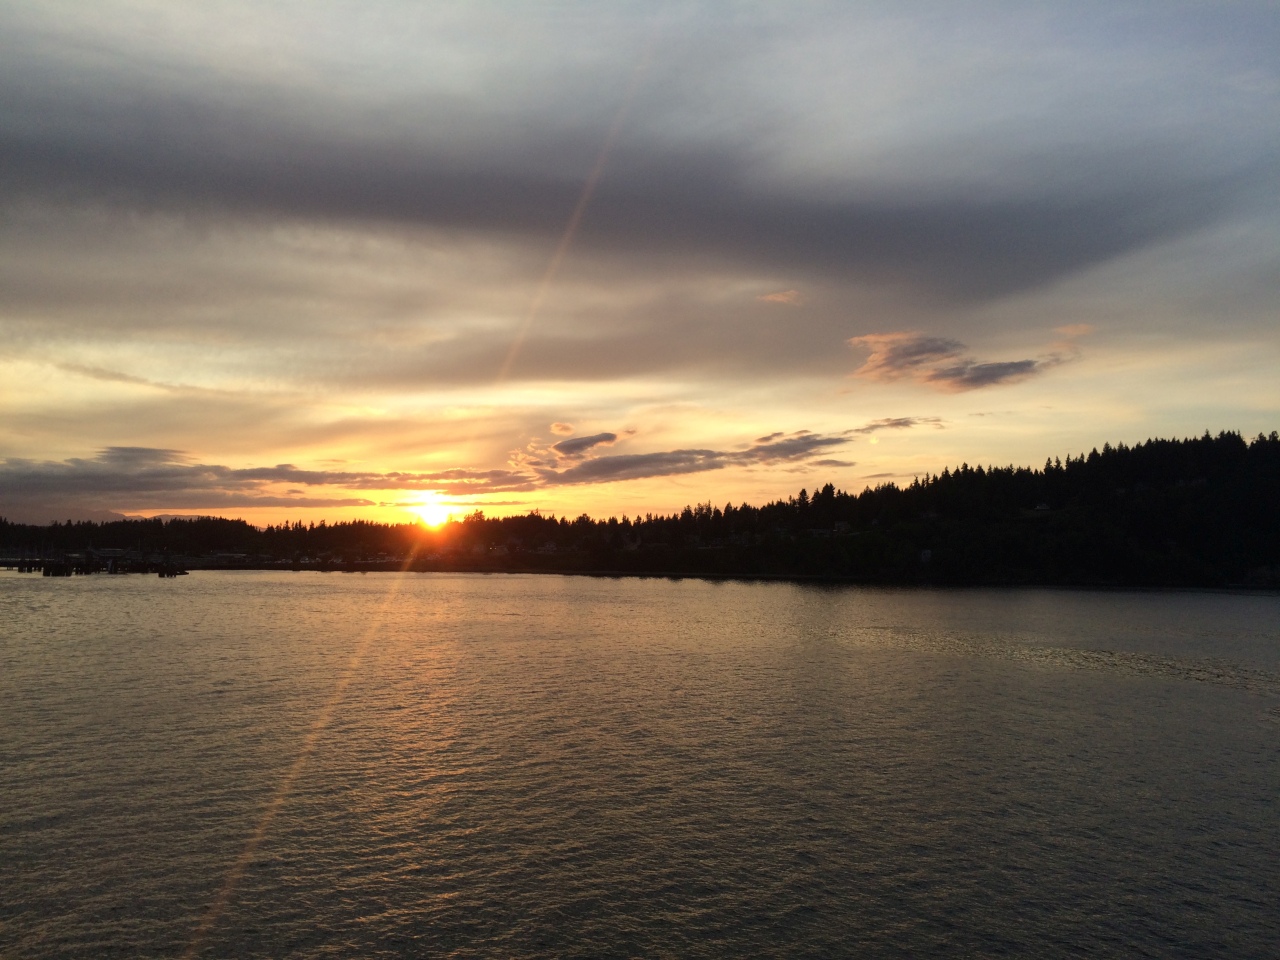 Yet another picture perfect sunset, this one during my ferry ride back to Seattle proper.